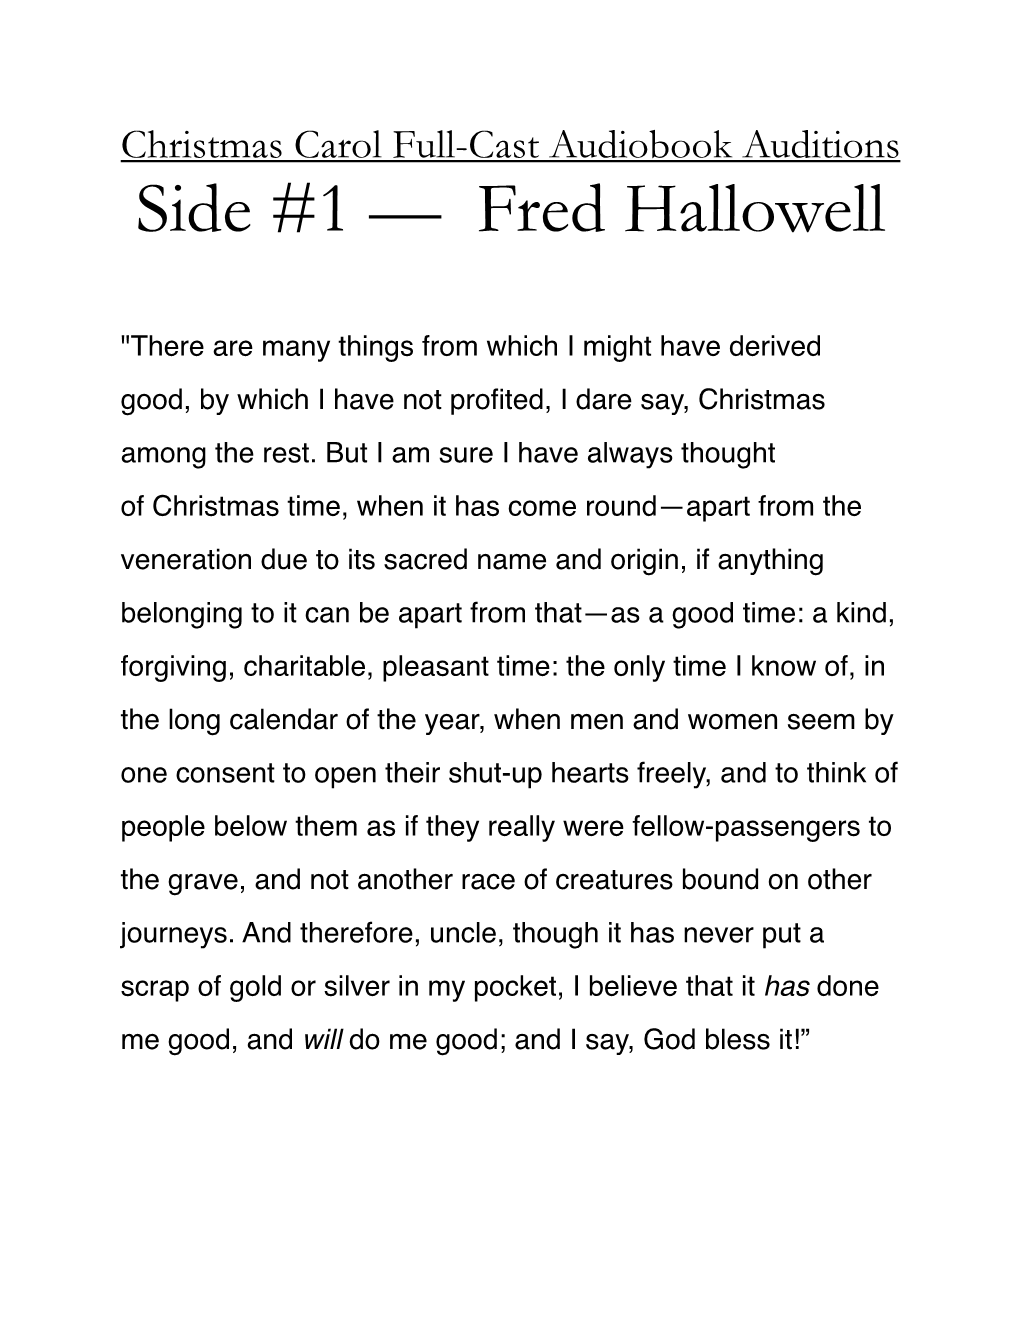 Fred Hallowell